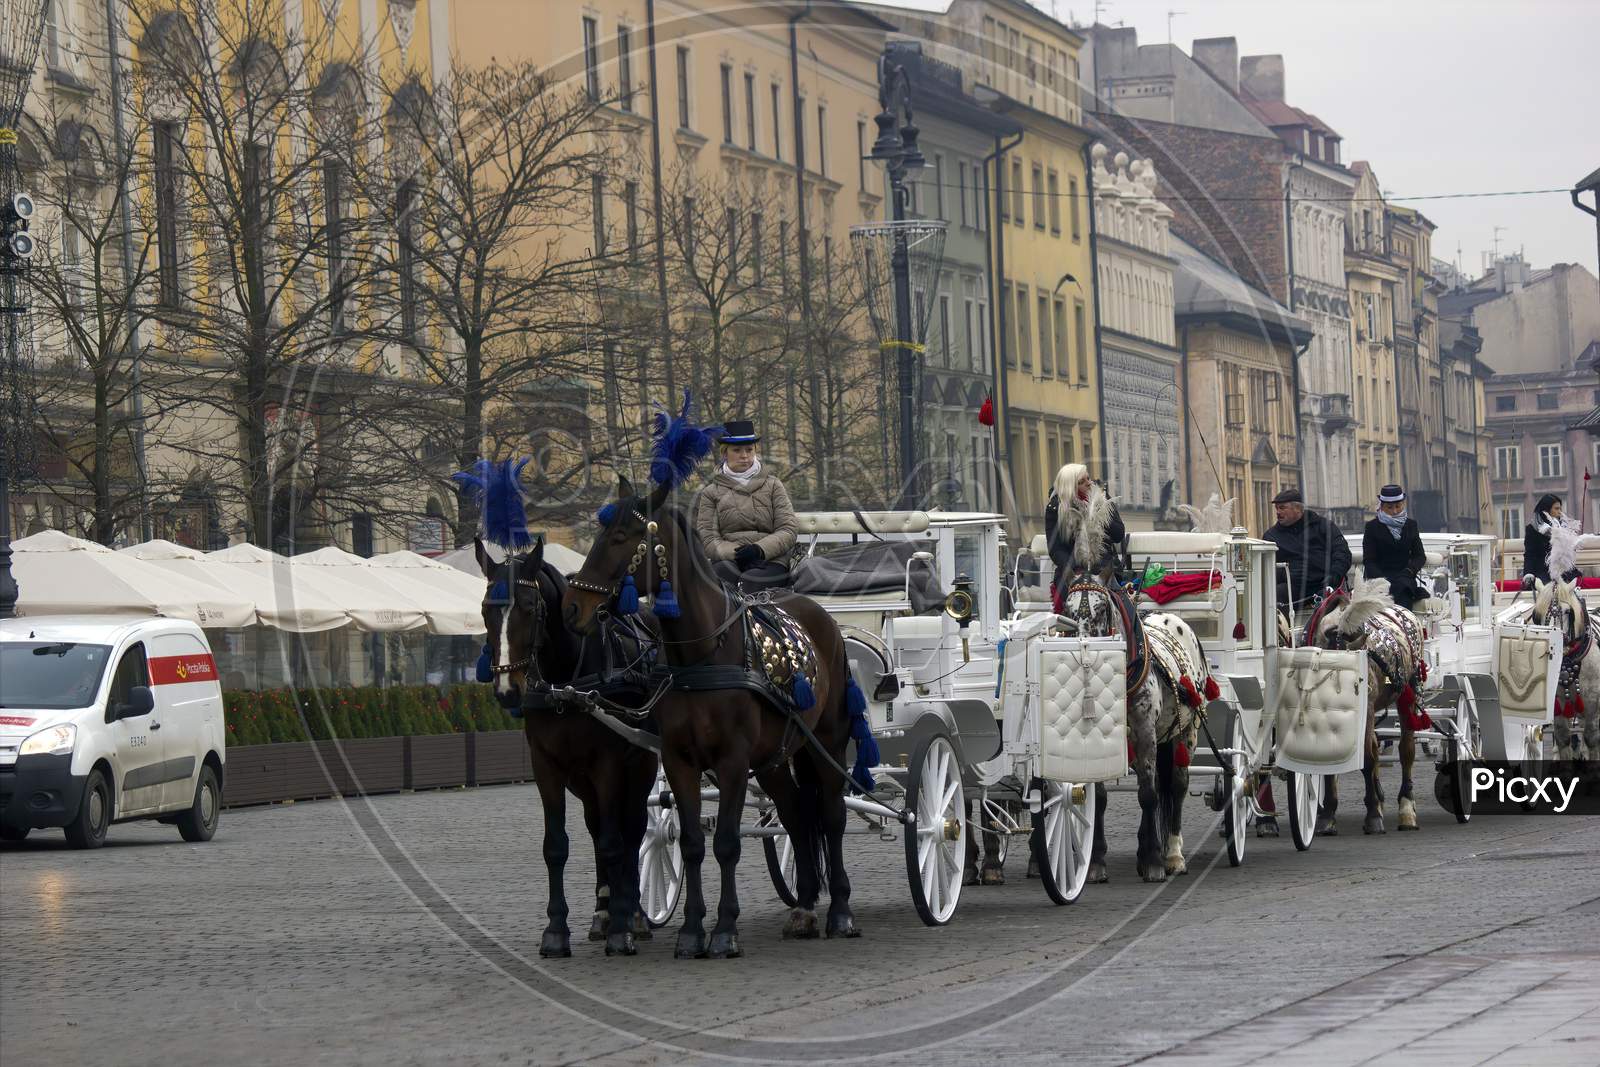 Krakow, Poland - December 16, 2014: Queue Of Horse Ride Carriage For Tourists During Christmas Eve In Winter